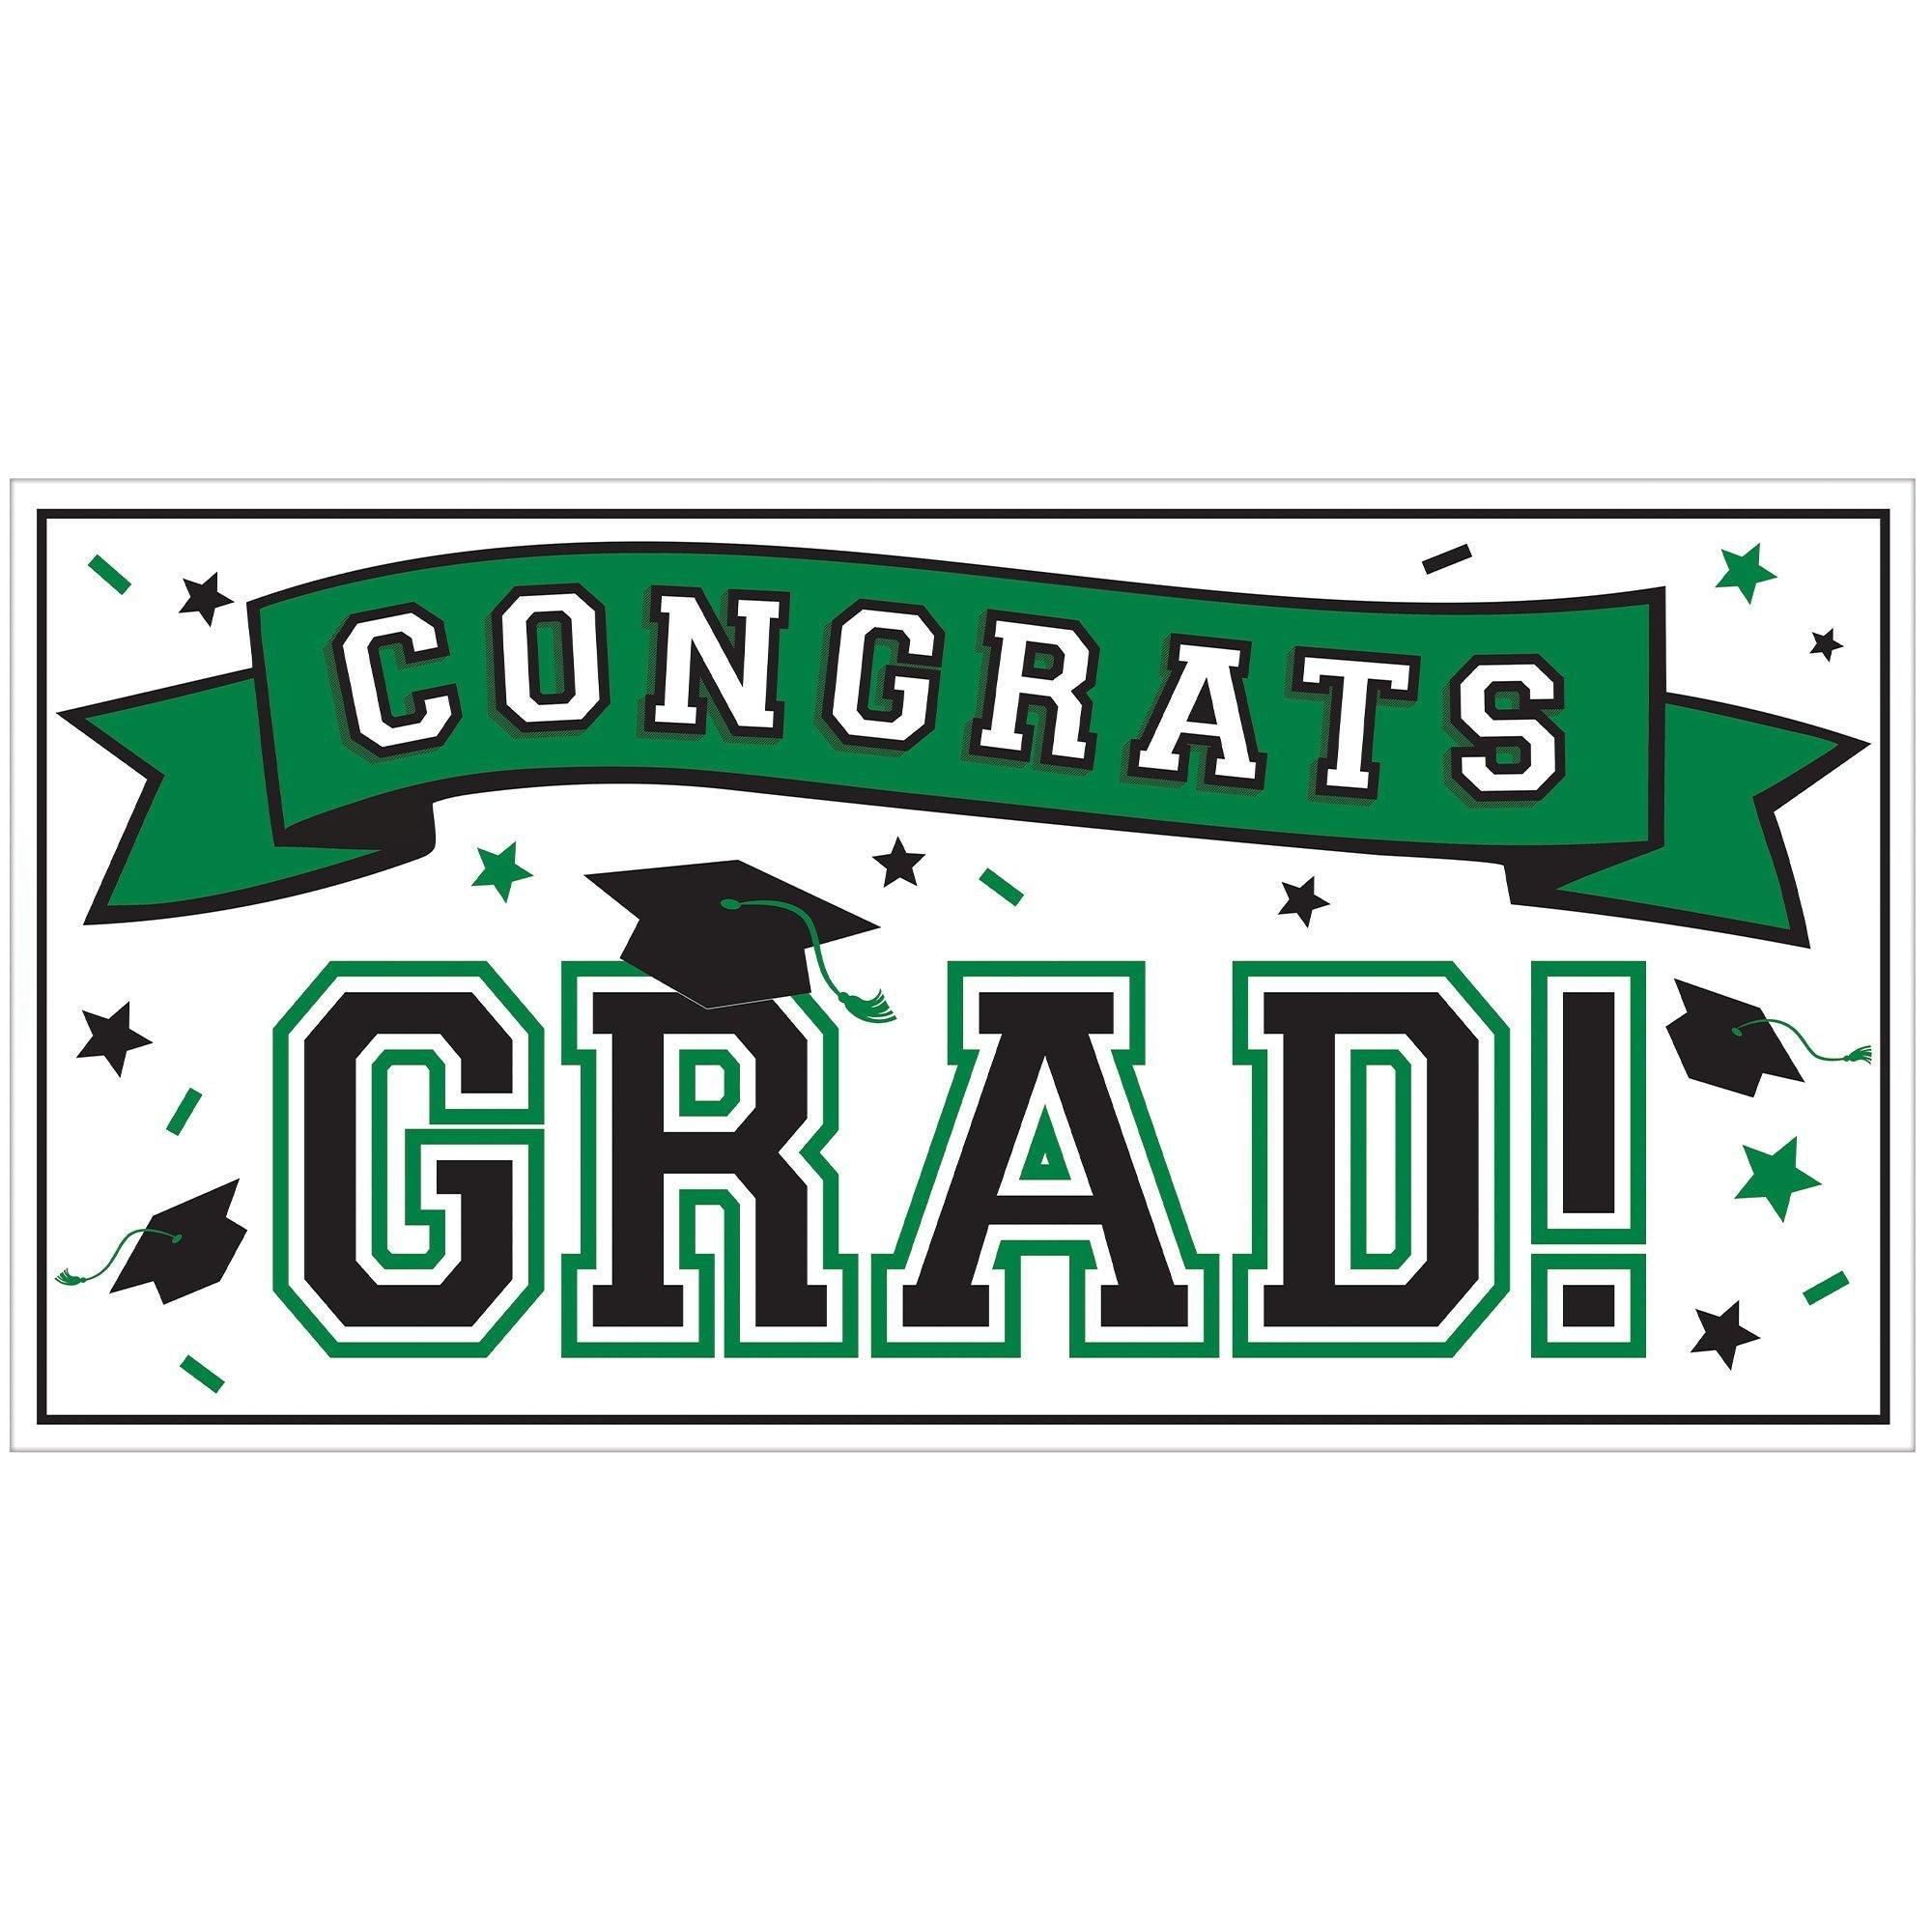 Graduation Party Decorations Kit with Banners, Balloons, Centerpiece, Streamers - Green 2024 Congrats Grad